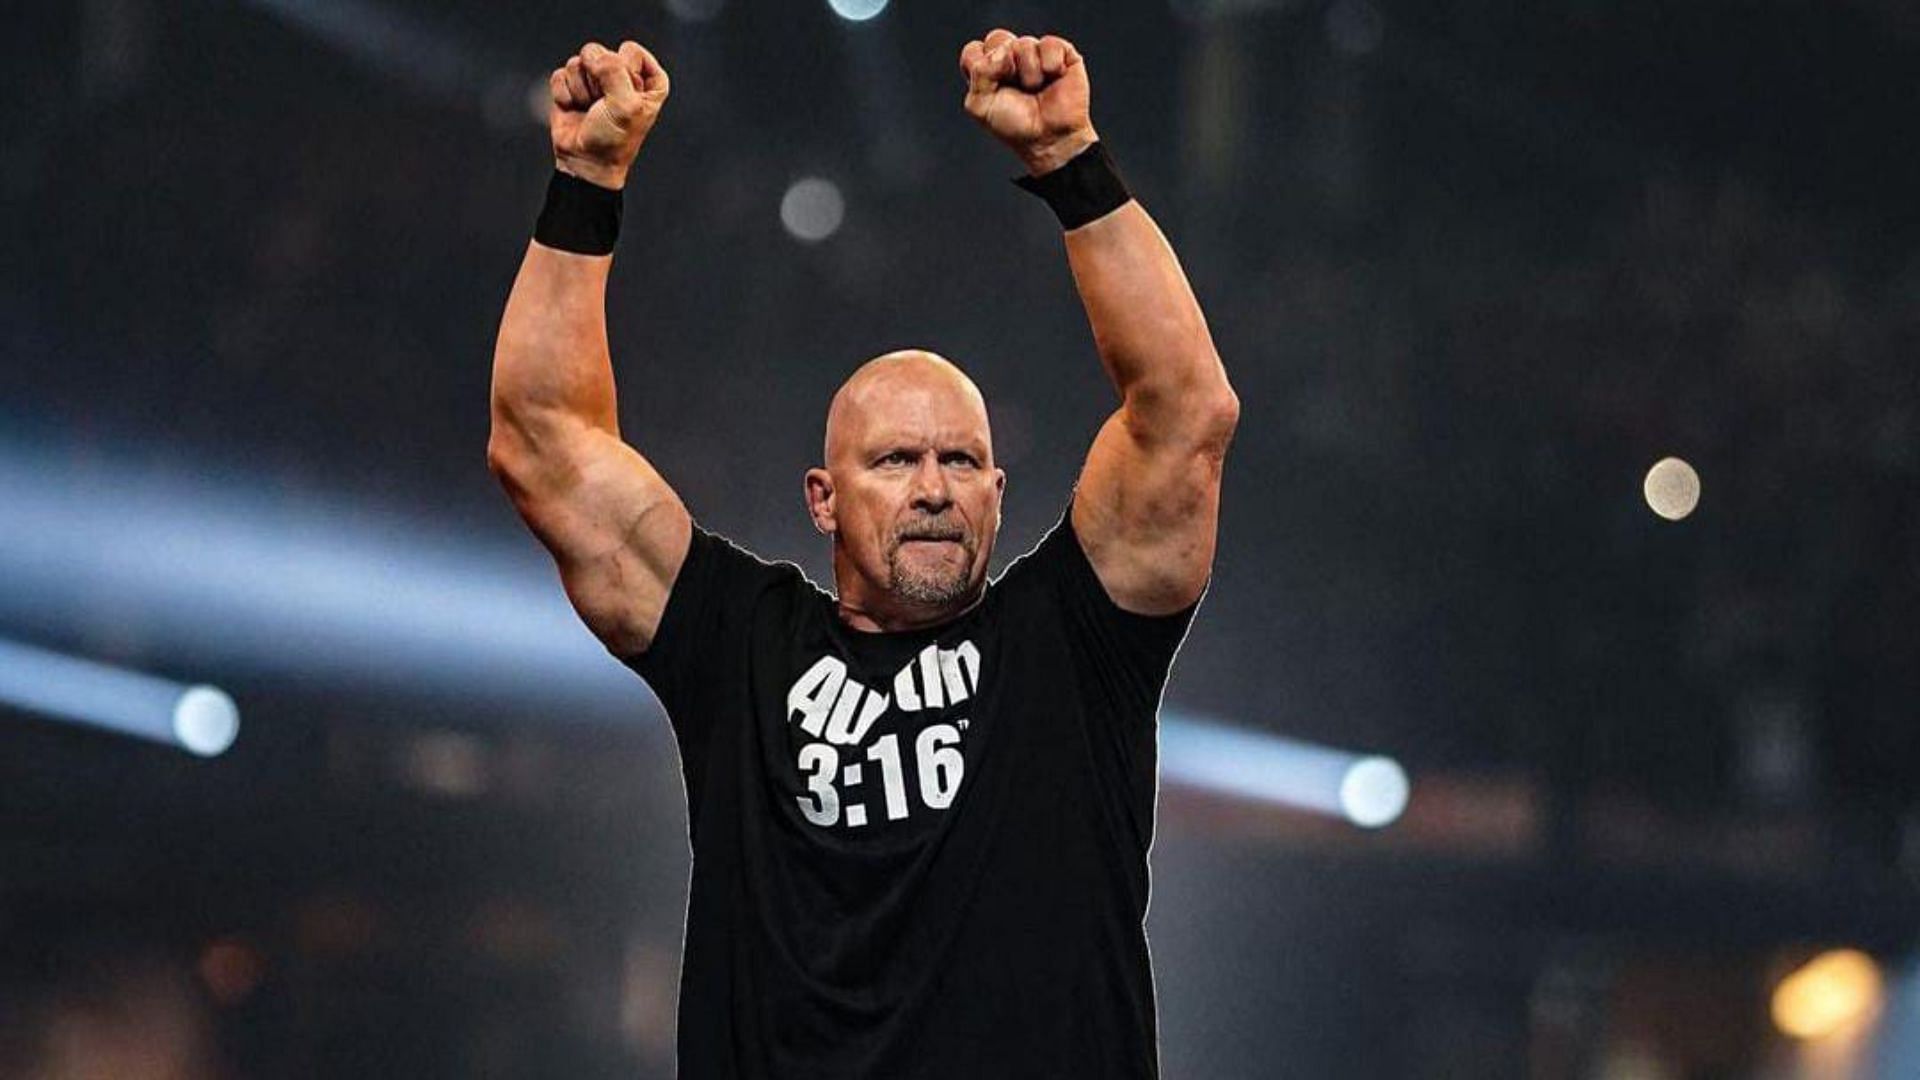 Stone Cold Steve Austin is considered one of WWE